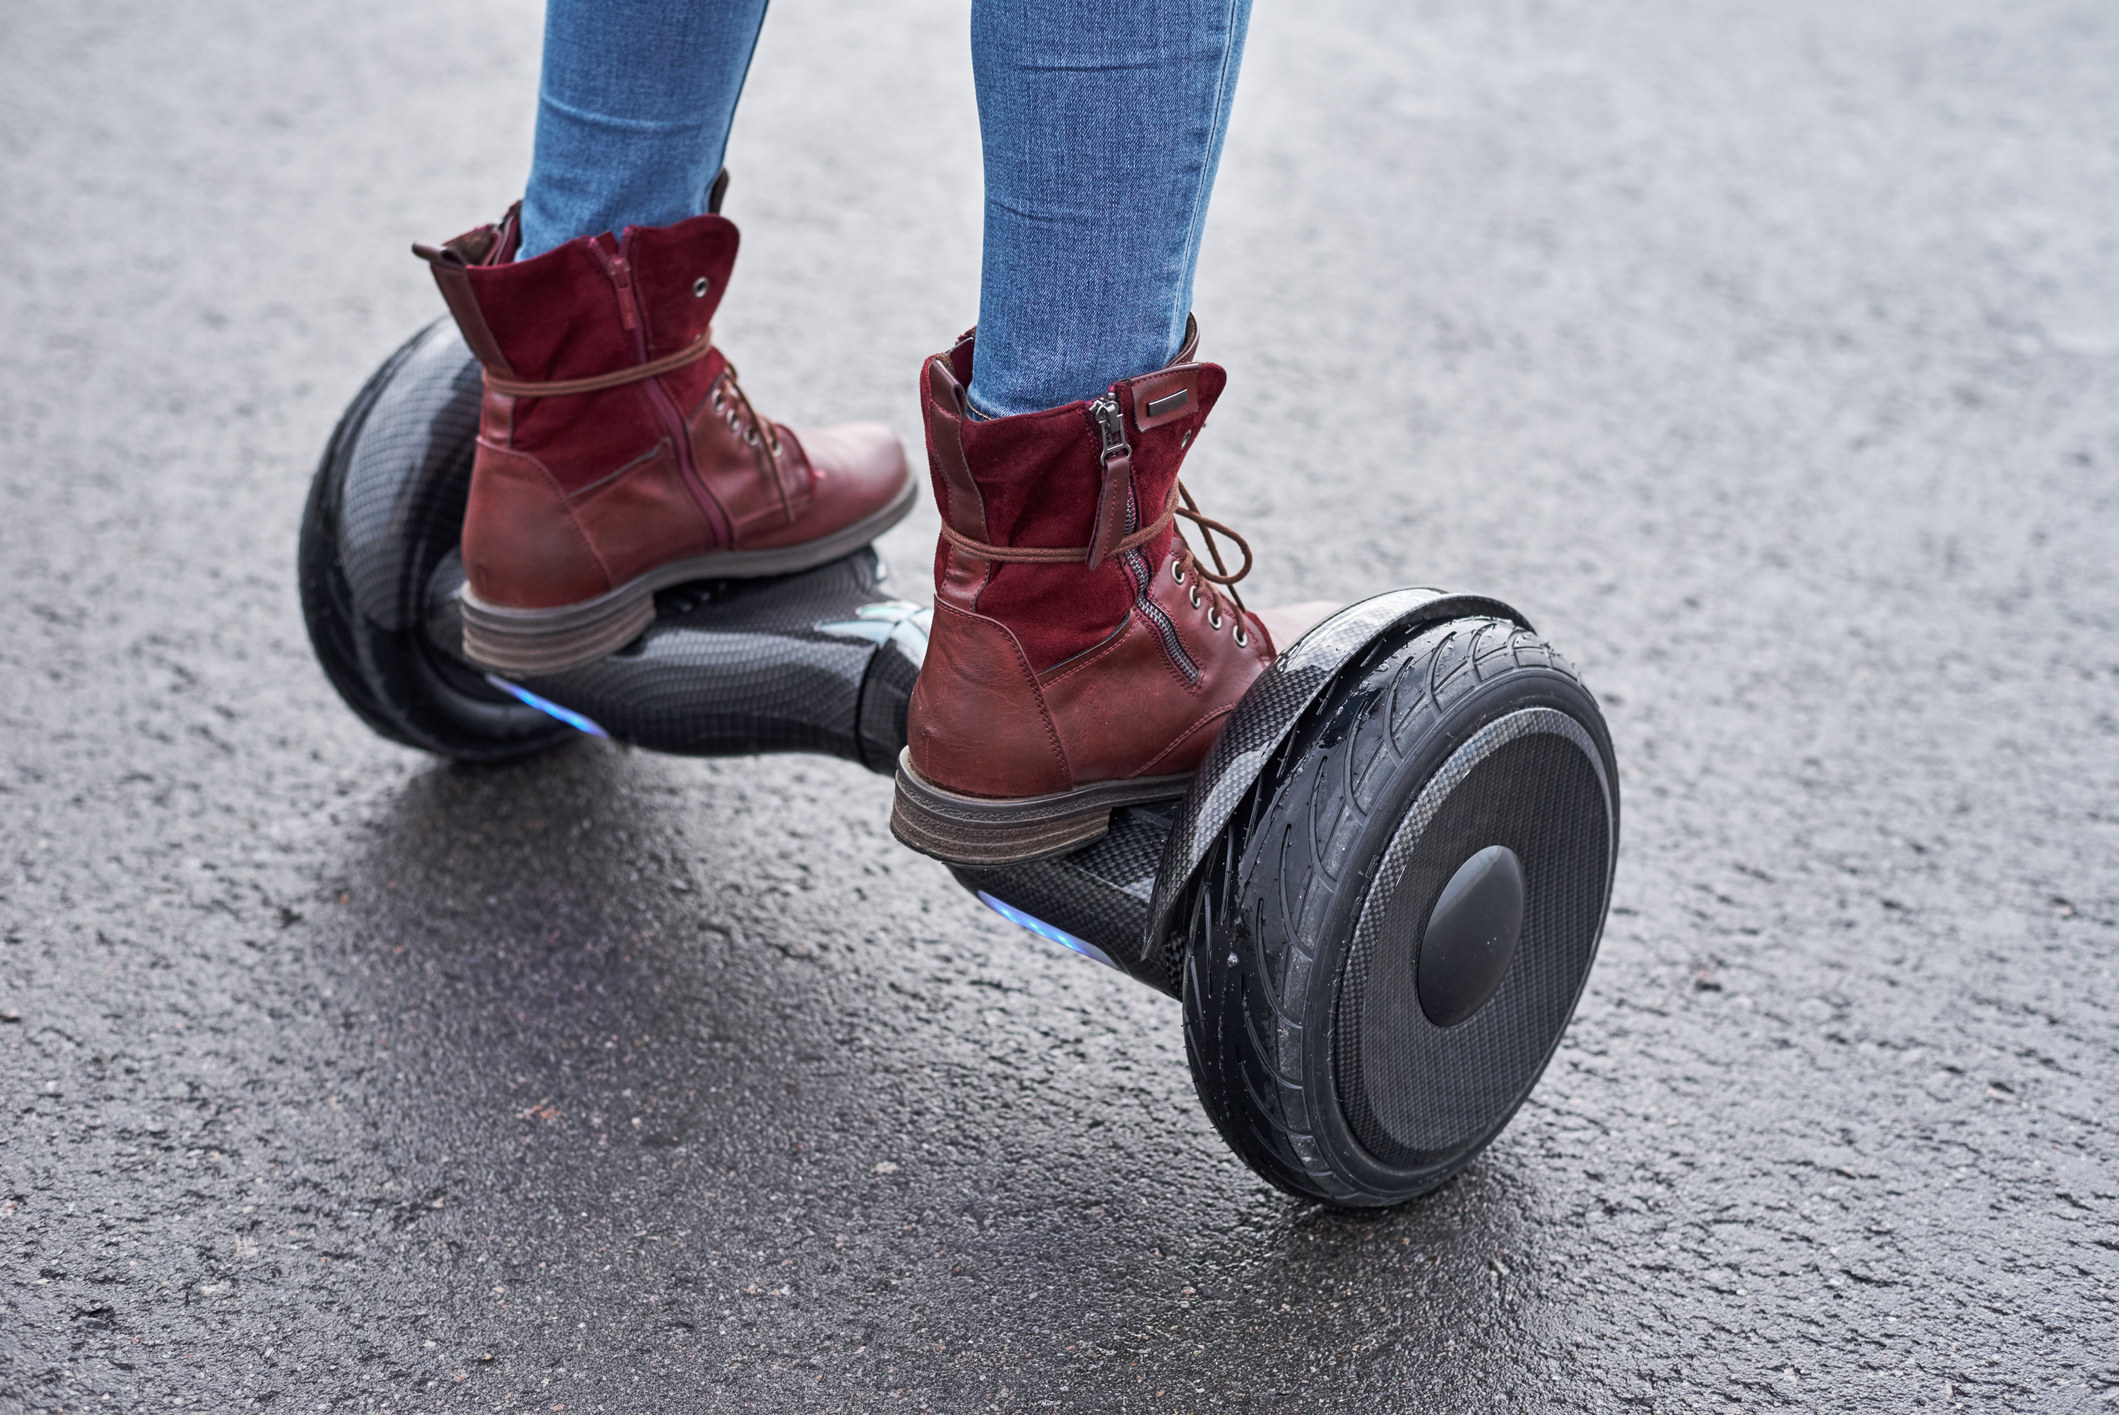 A person on a Hoverboard